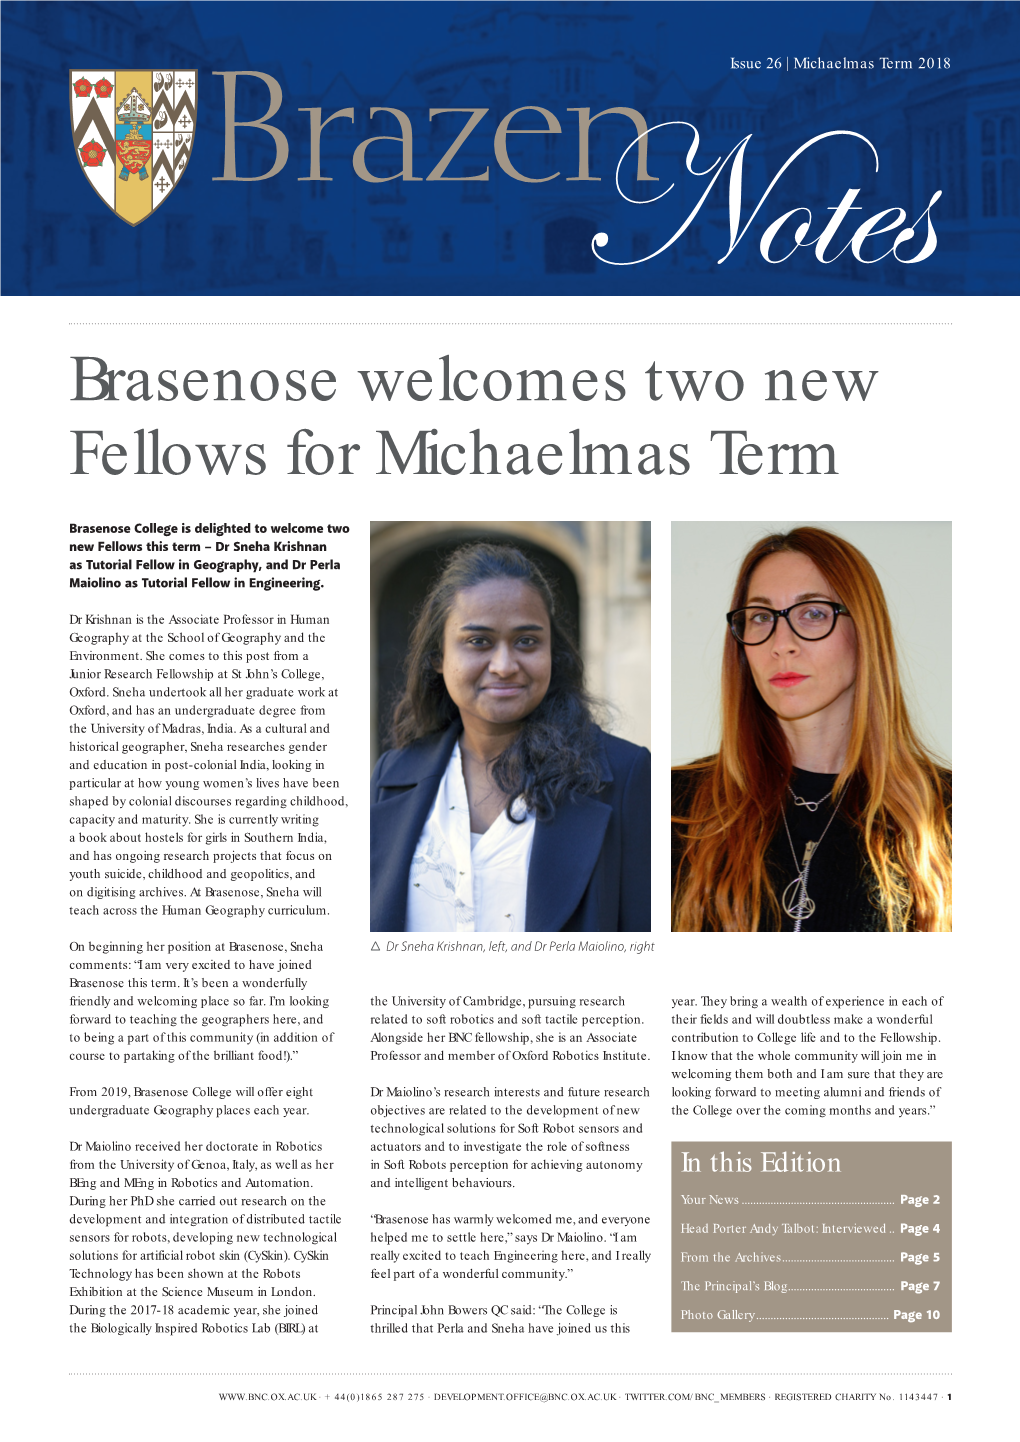 Brasenose Welcomes Two New Fellows for Michaelmas Term